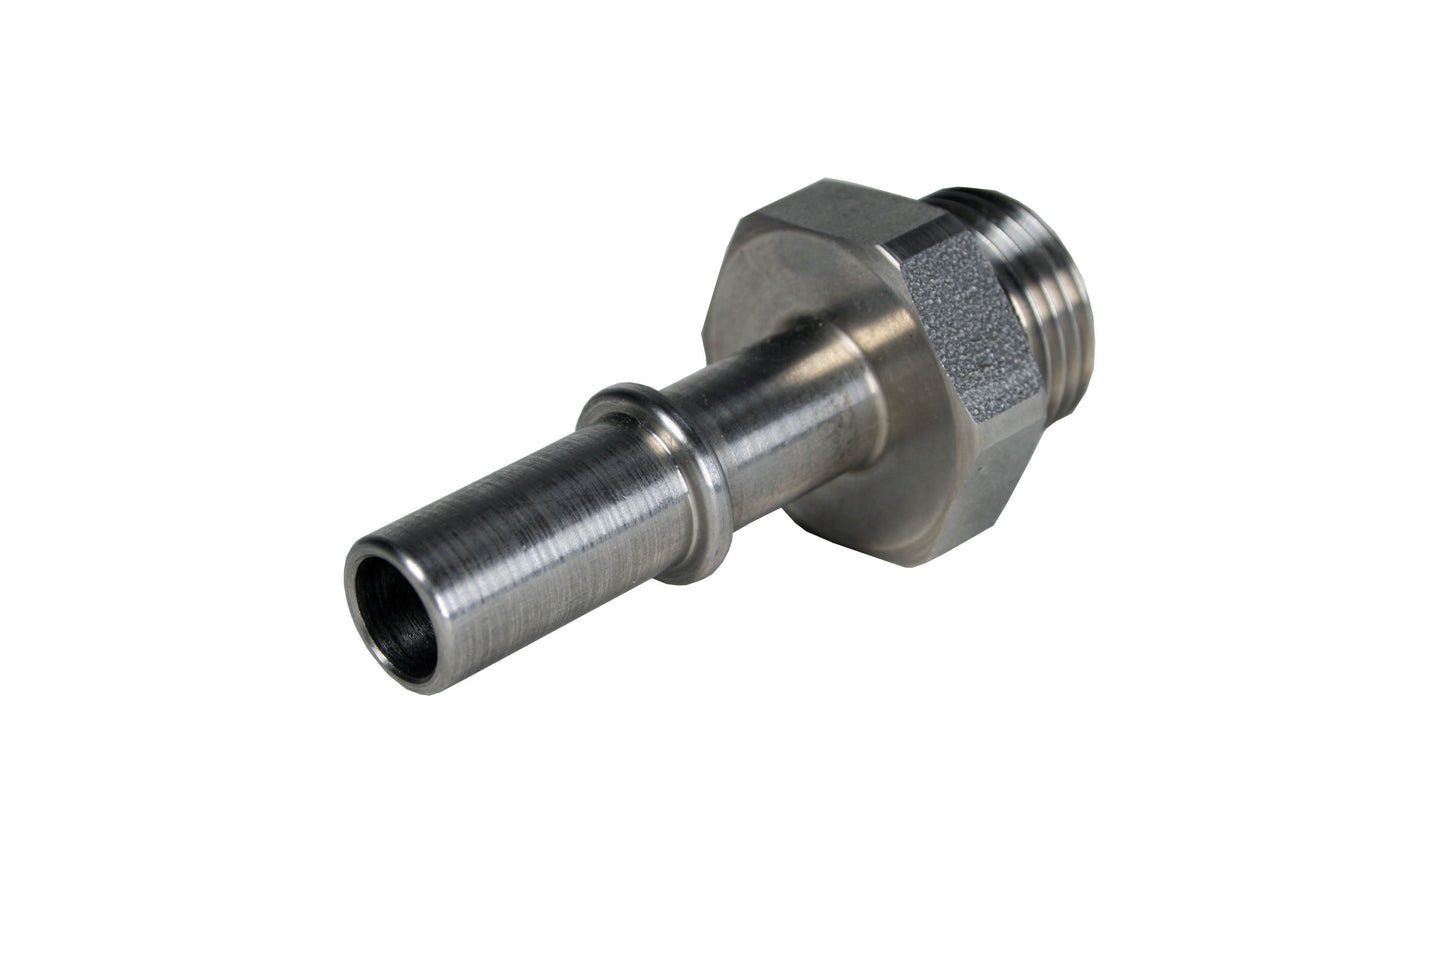 Male Quick Connect Adapters - Straight, 1/2"